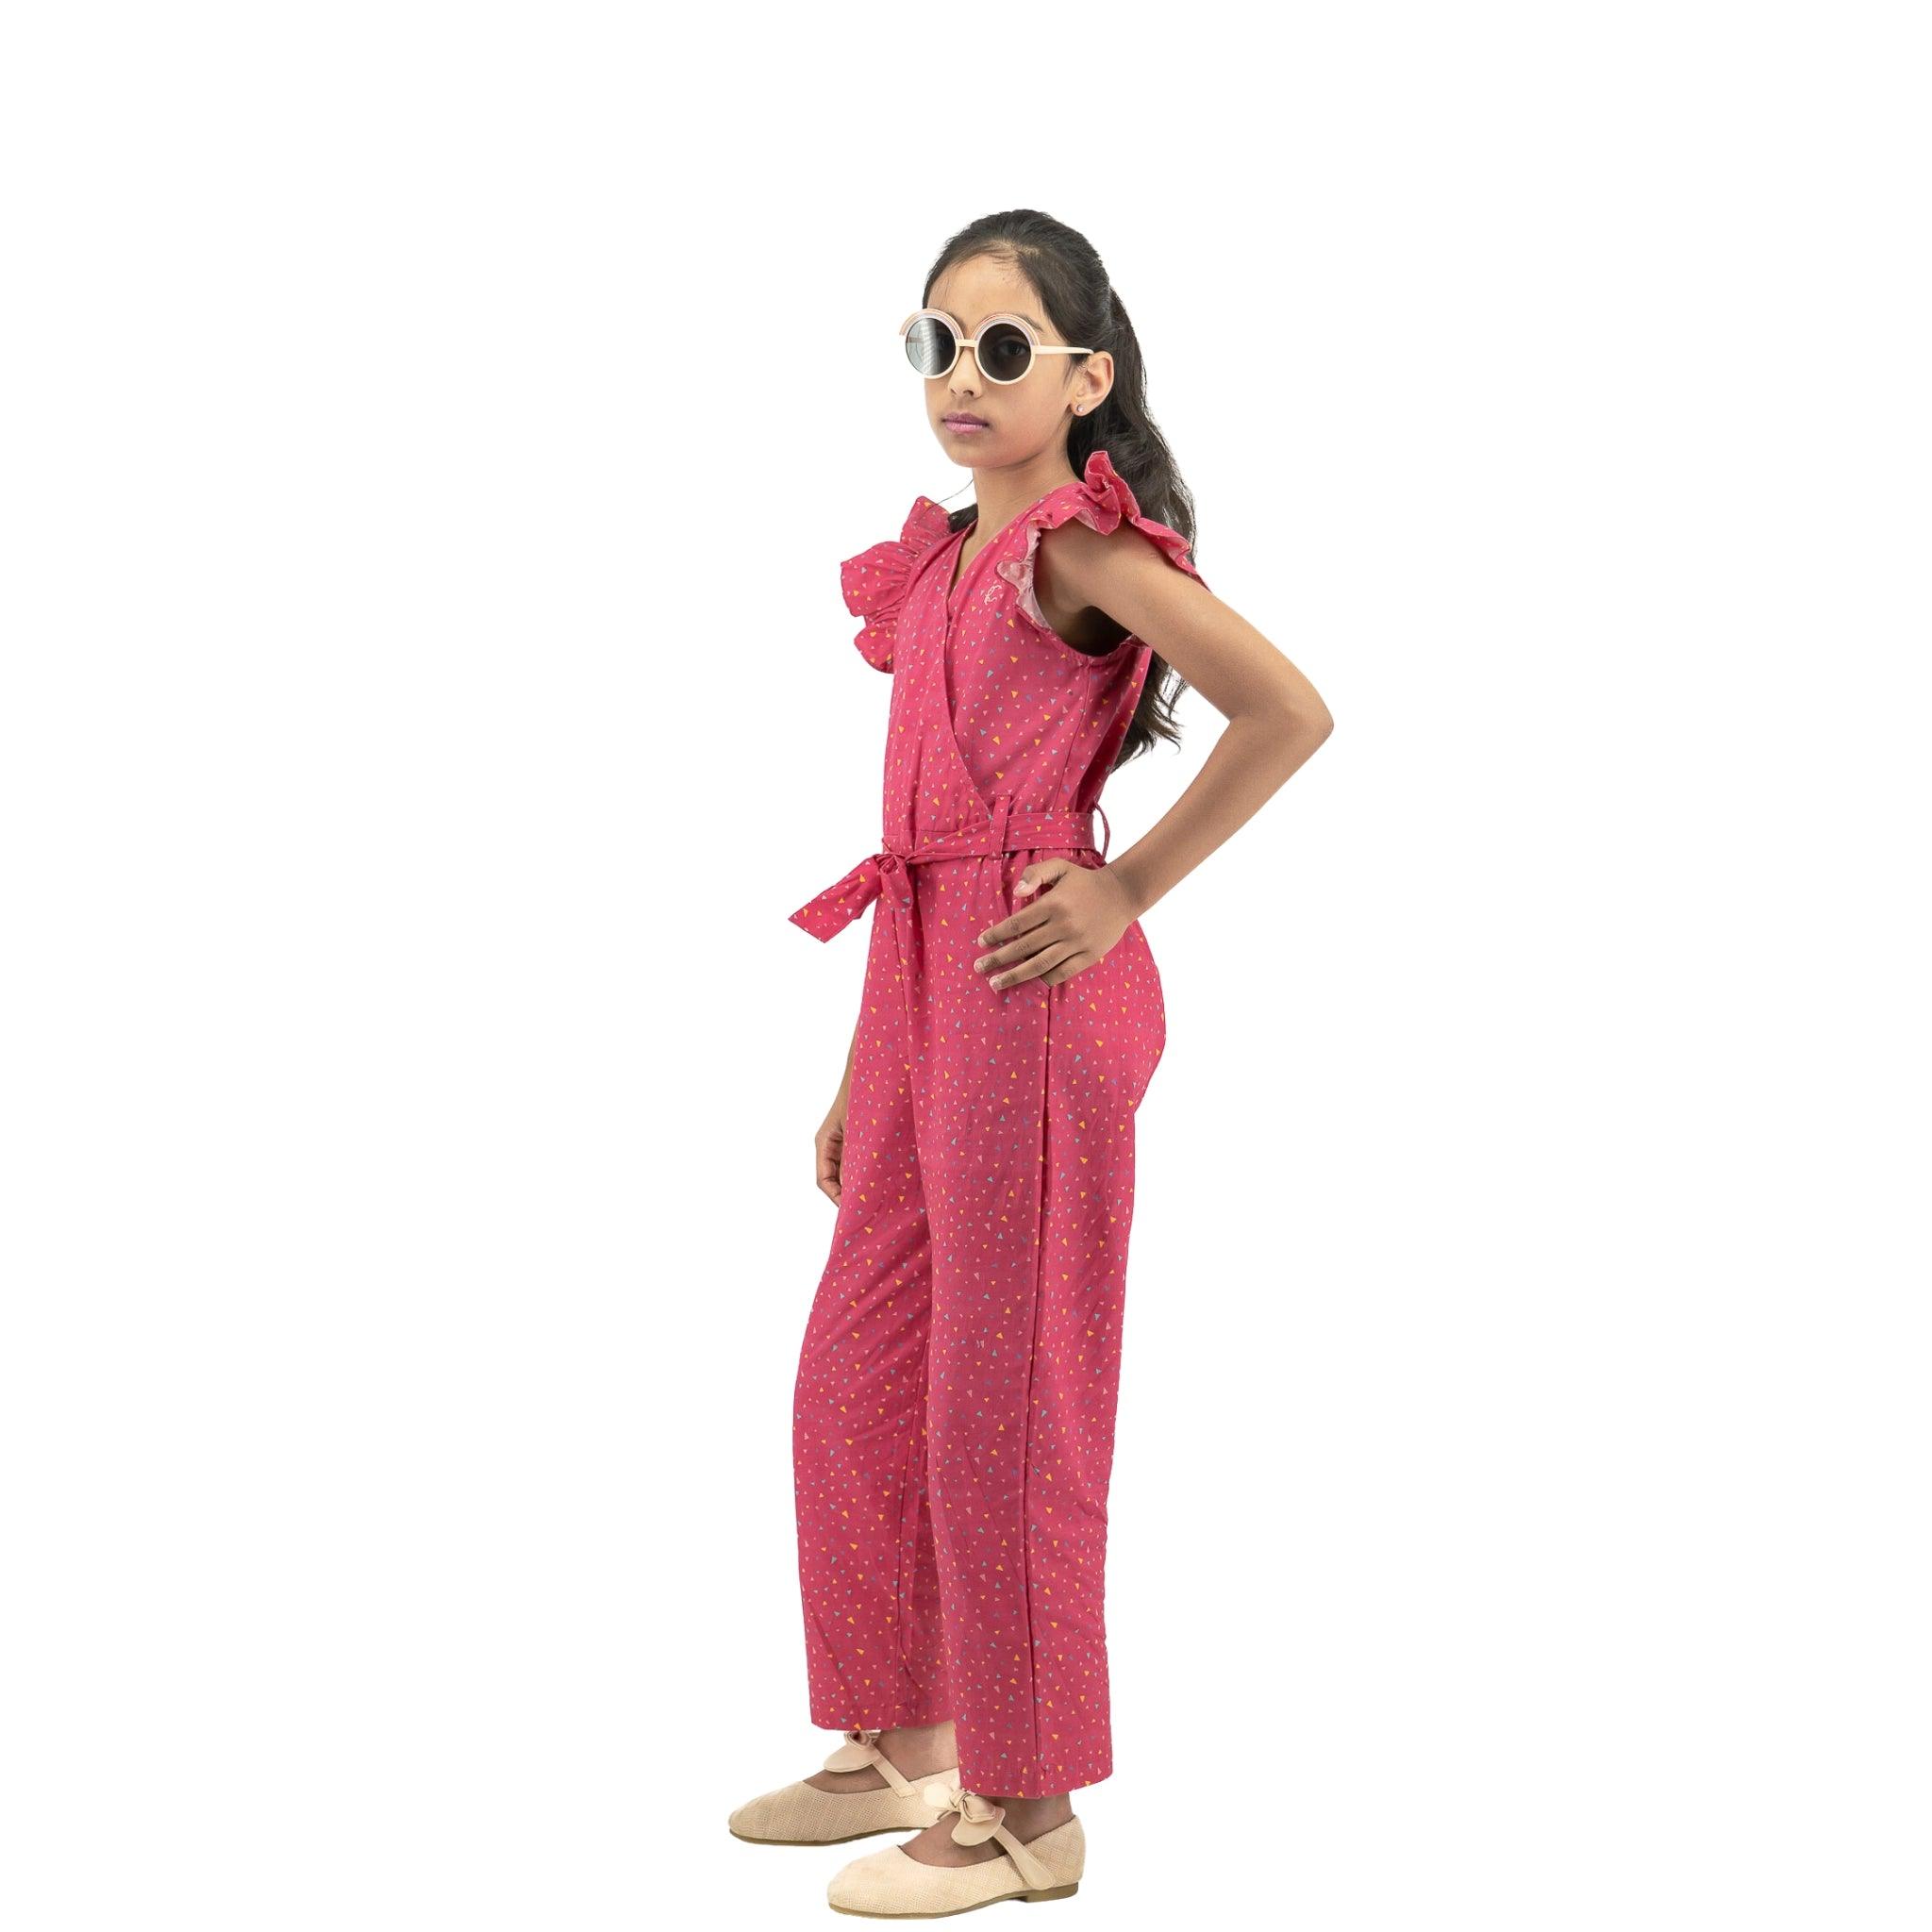 Young girl wearing a Karee Red Rose Cotton Jumpsuit for Girls and large sunglasses, posing with hands on hips against a white background.